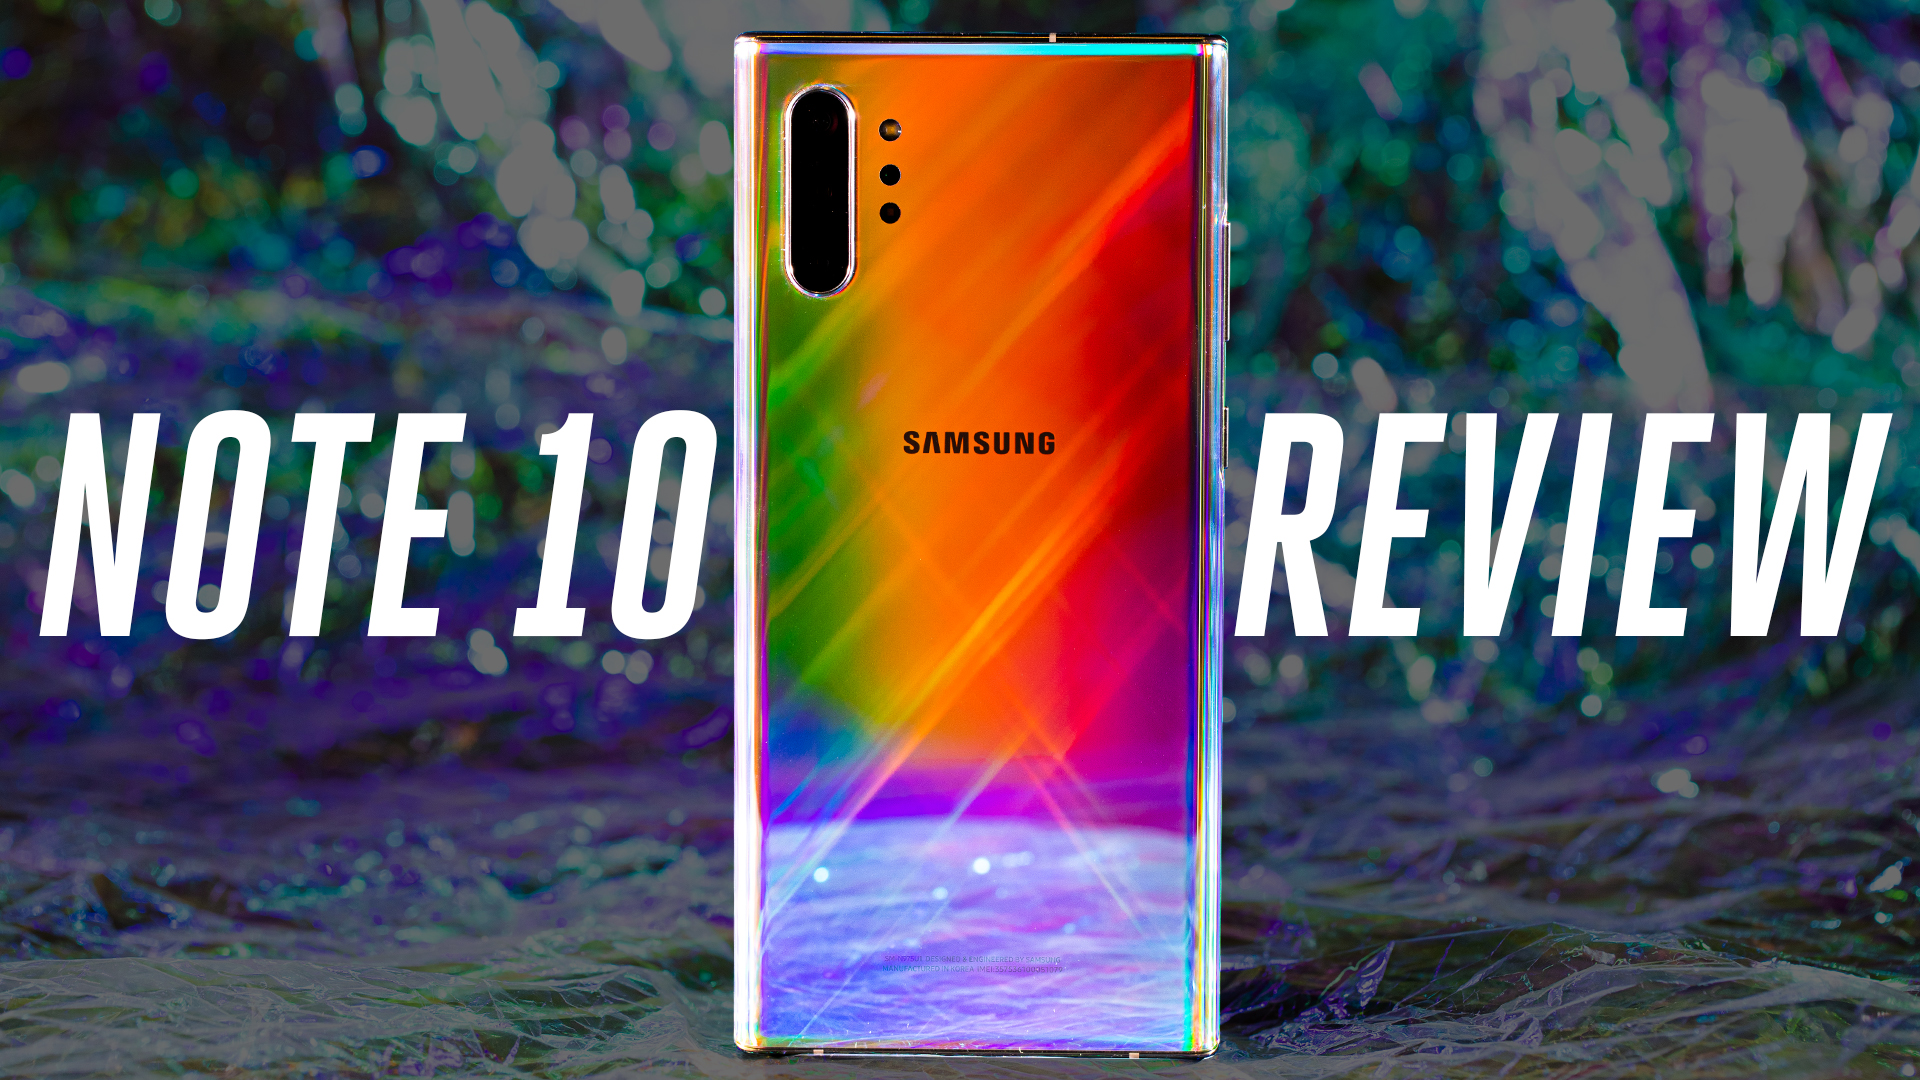 Samsung Galaxy Note 10 Unpacked event: the biggest announcements - The Verge